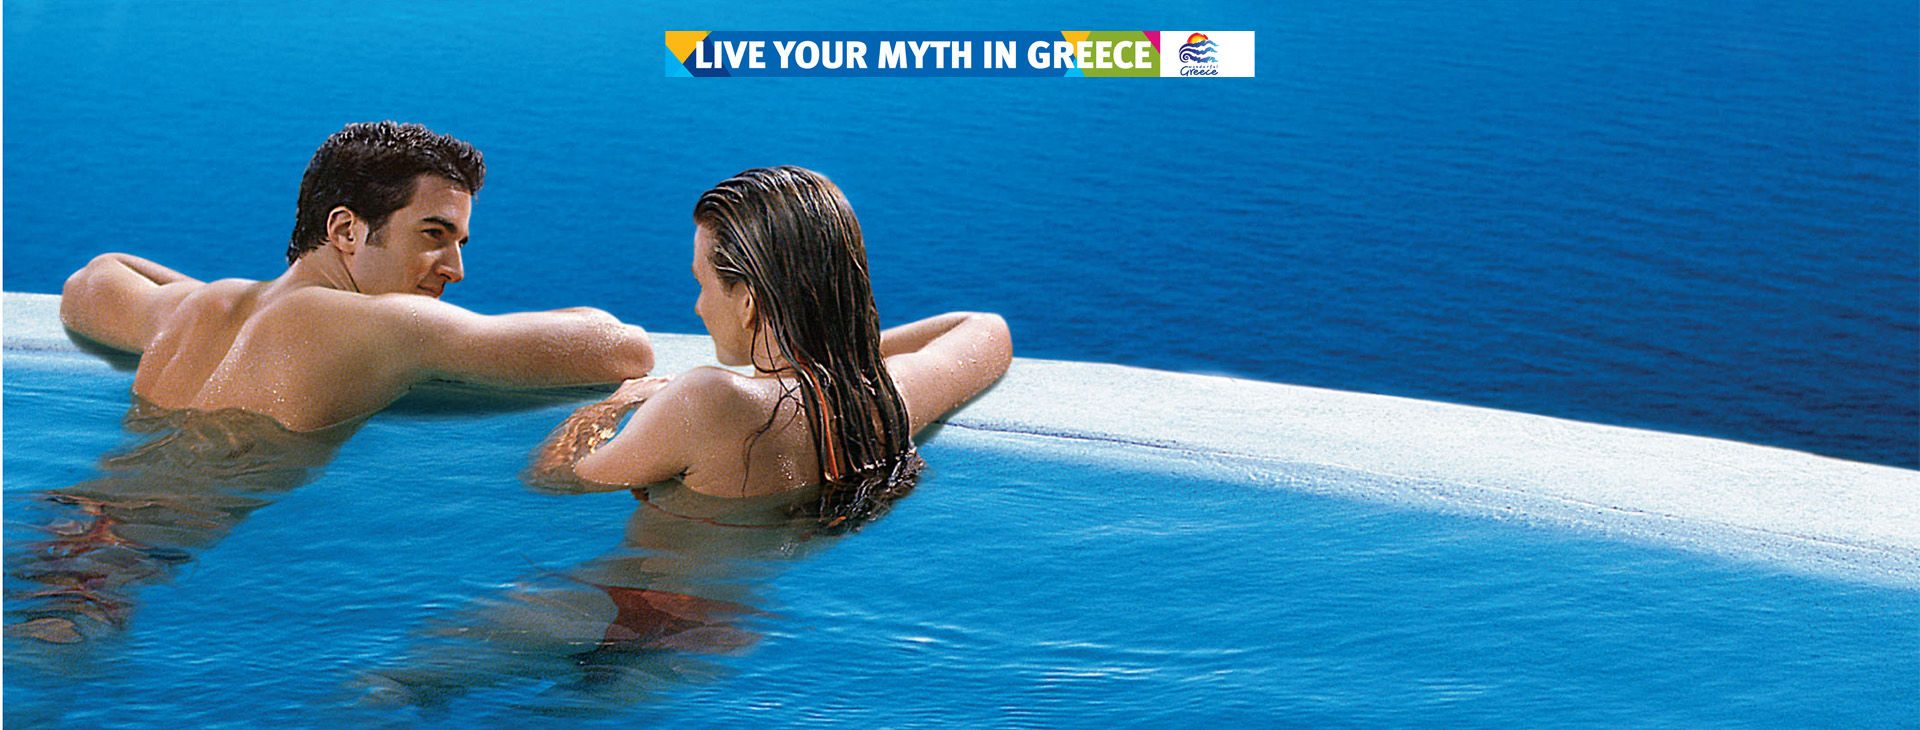 Live Your Myth in Greece